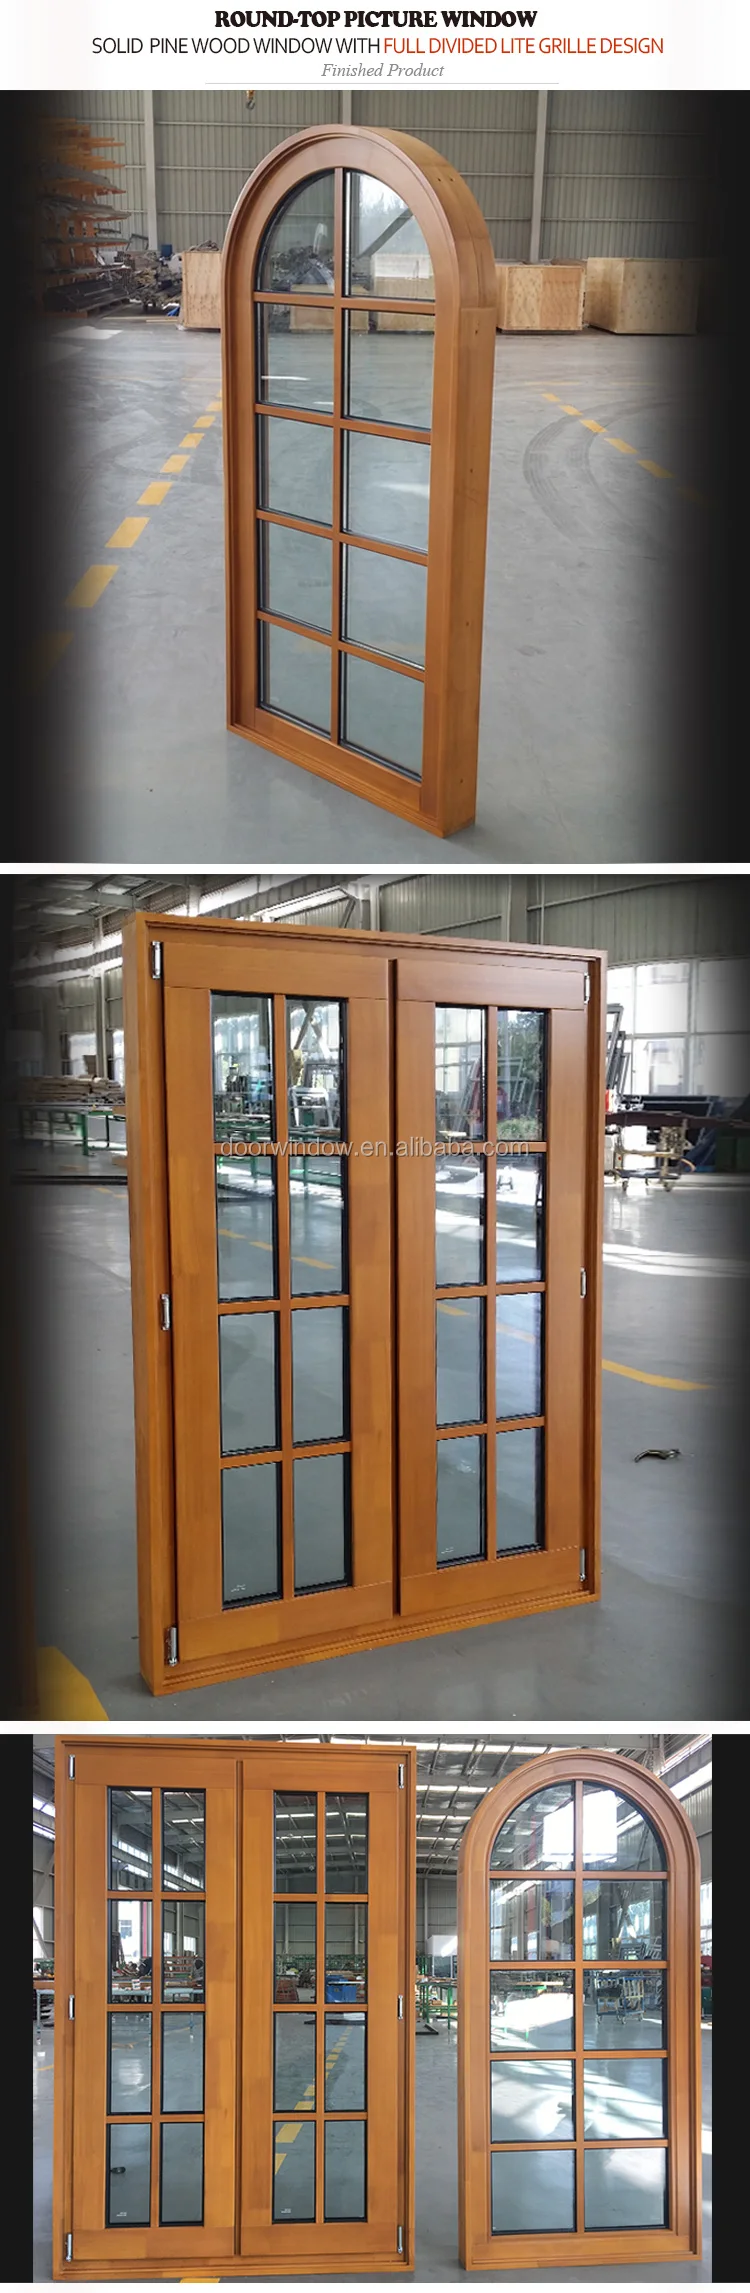 Modern grille design arched top aluminum clad wood window